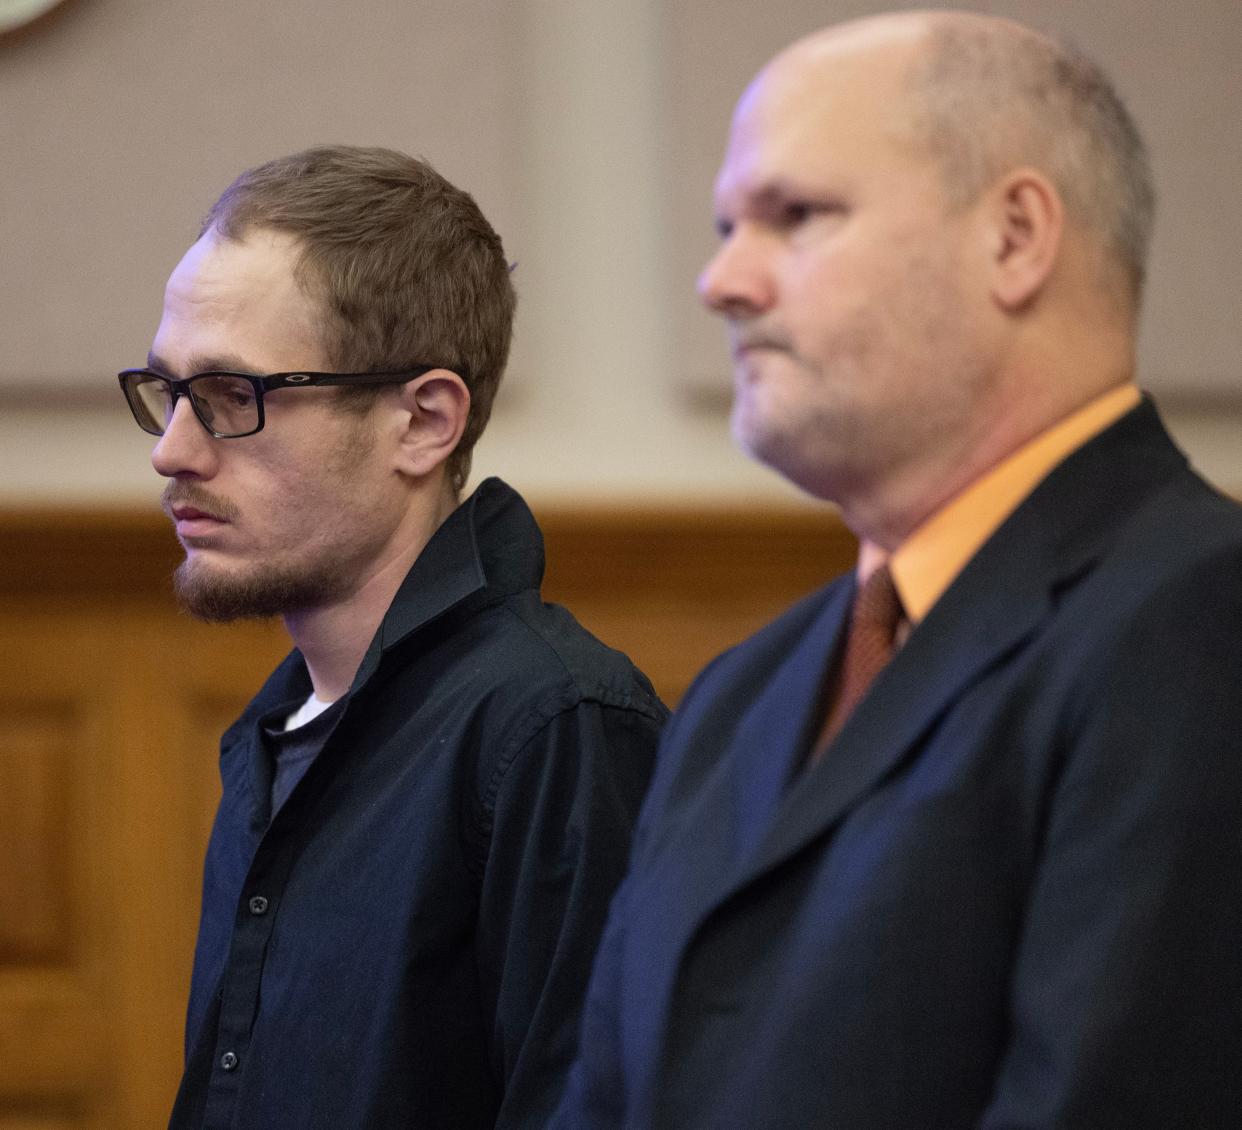 Tyler Scullion, left, accompanied by attorney Kevin McCue, was sentenced Monday to a year in prison for a Jan. 14 traffic crash that killed passenger Kyle O. Gill.